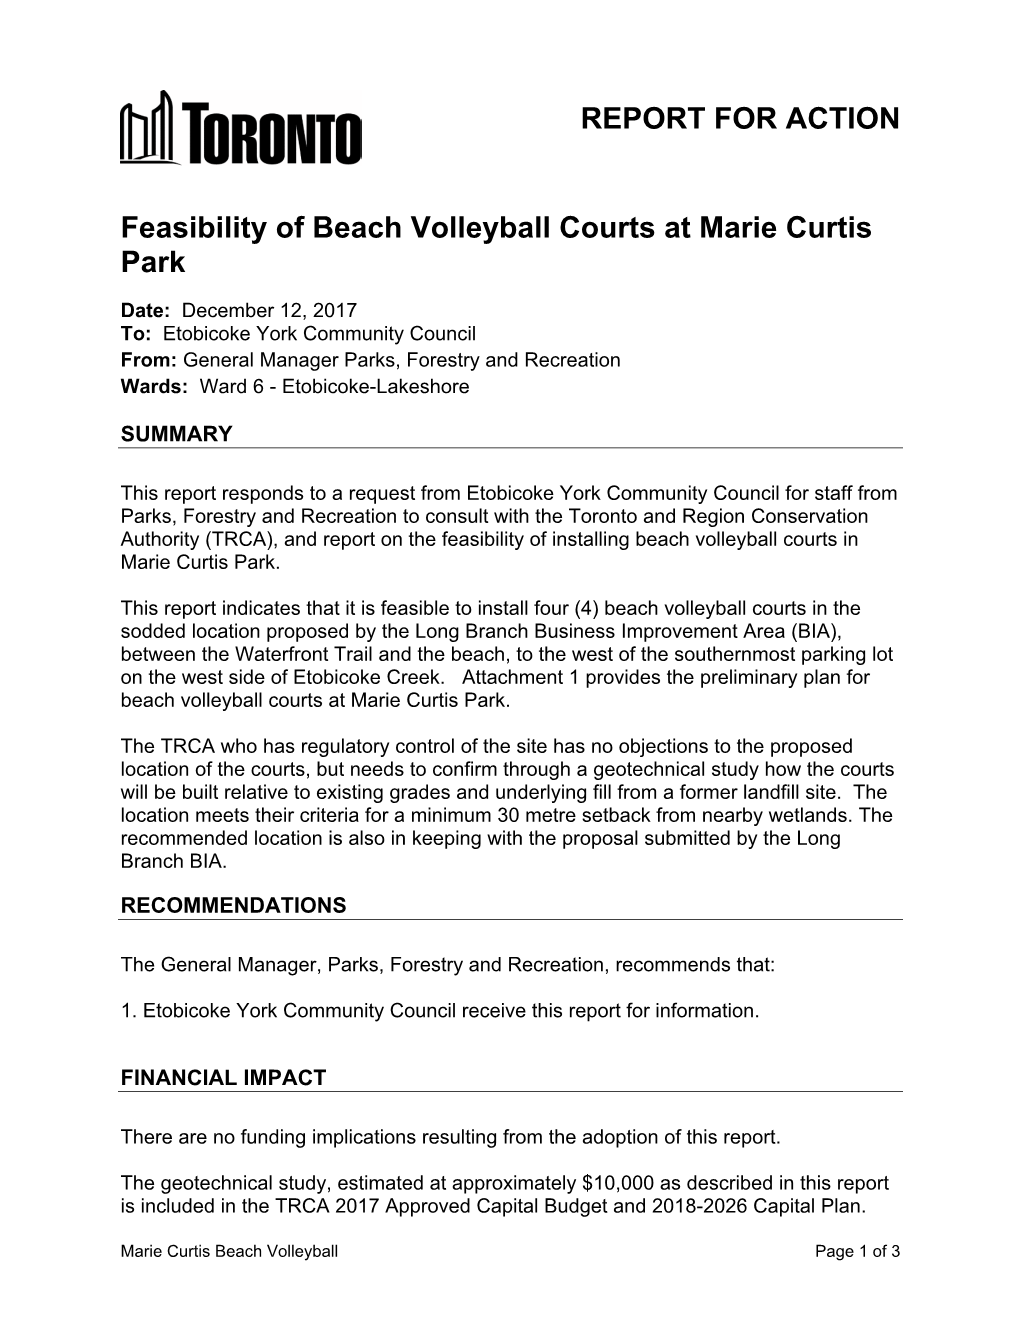 Feasibility of Beach Volleyball Courts at Marie Curtis Park